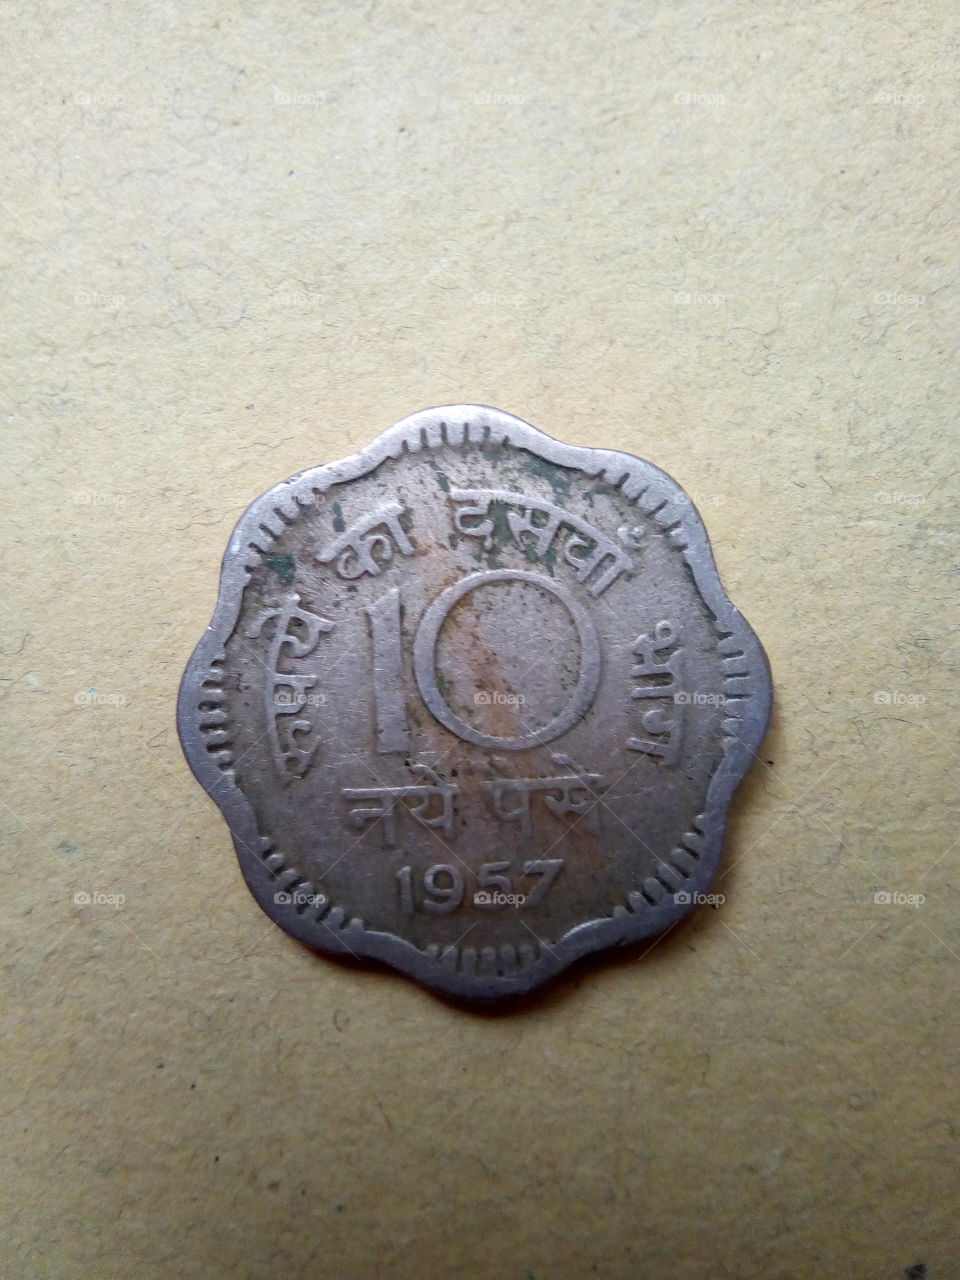 Old Indian 10 Pesa (1/10 of one Rupee) of 1957.